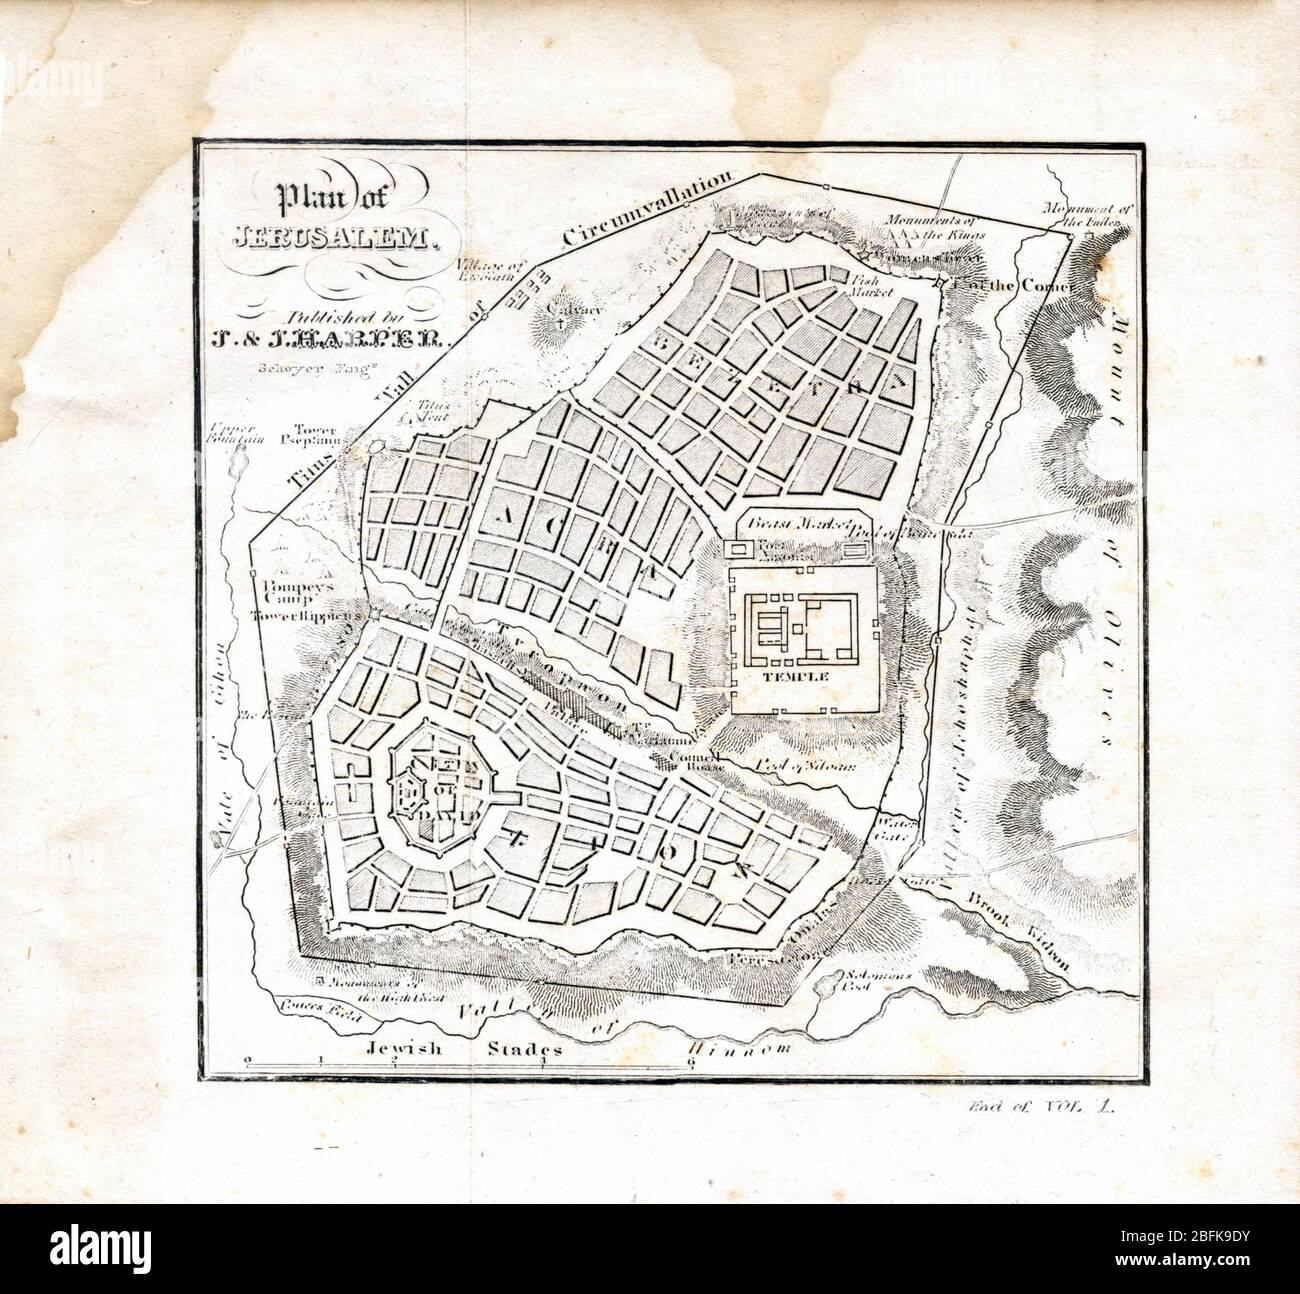 Plan of Jerusalem 1841 Originally from 'The history of the Jews : from the earliest period to the present time' Scanned map showing mid 19th century interpretation of ancient Jerusalem Stock Photo